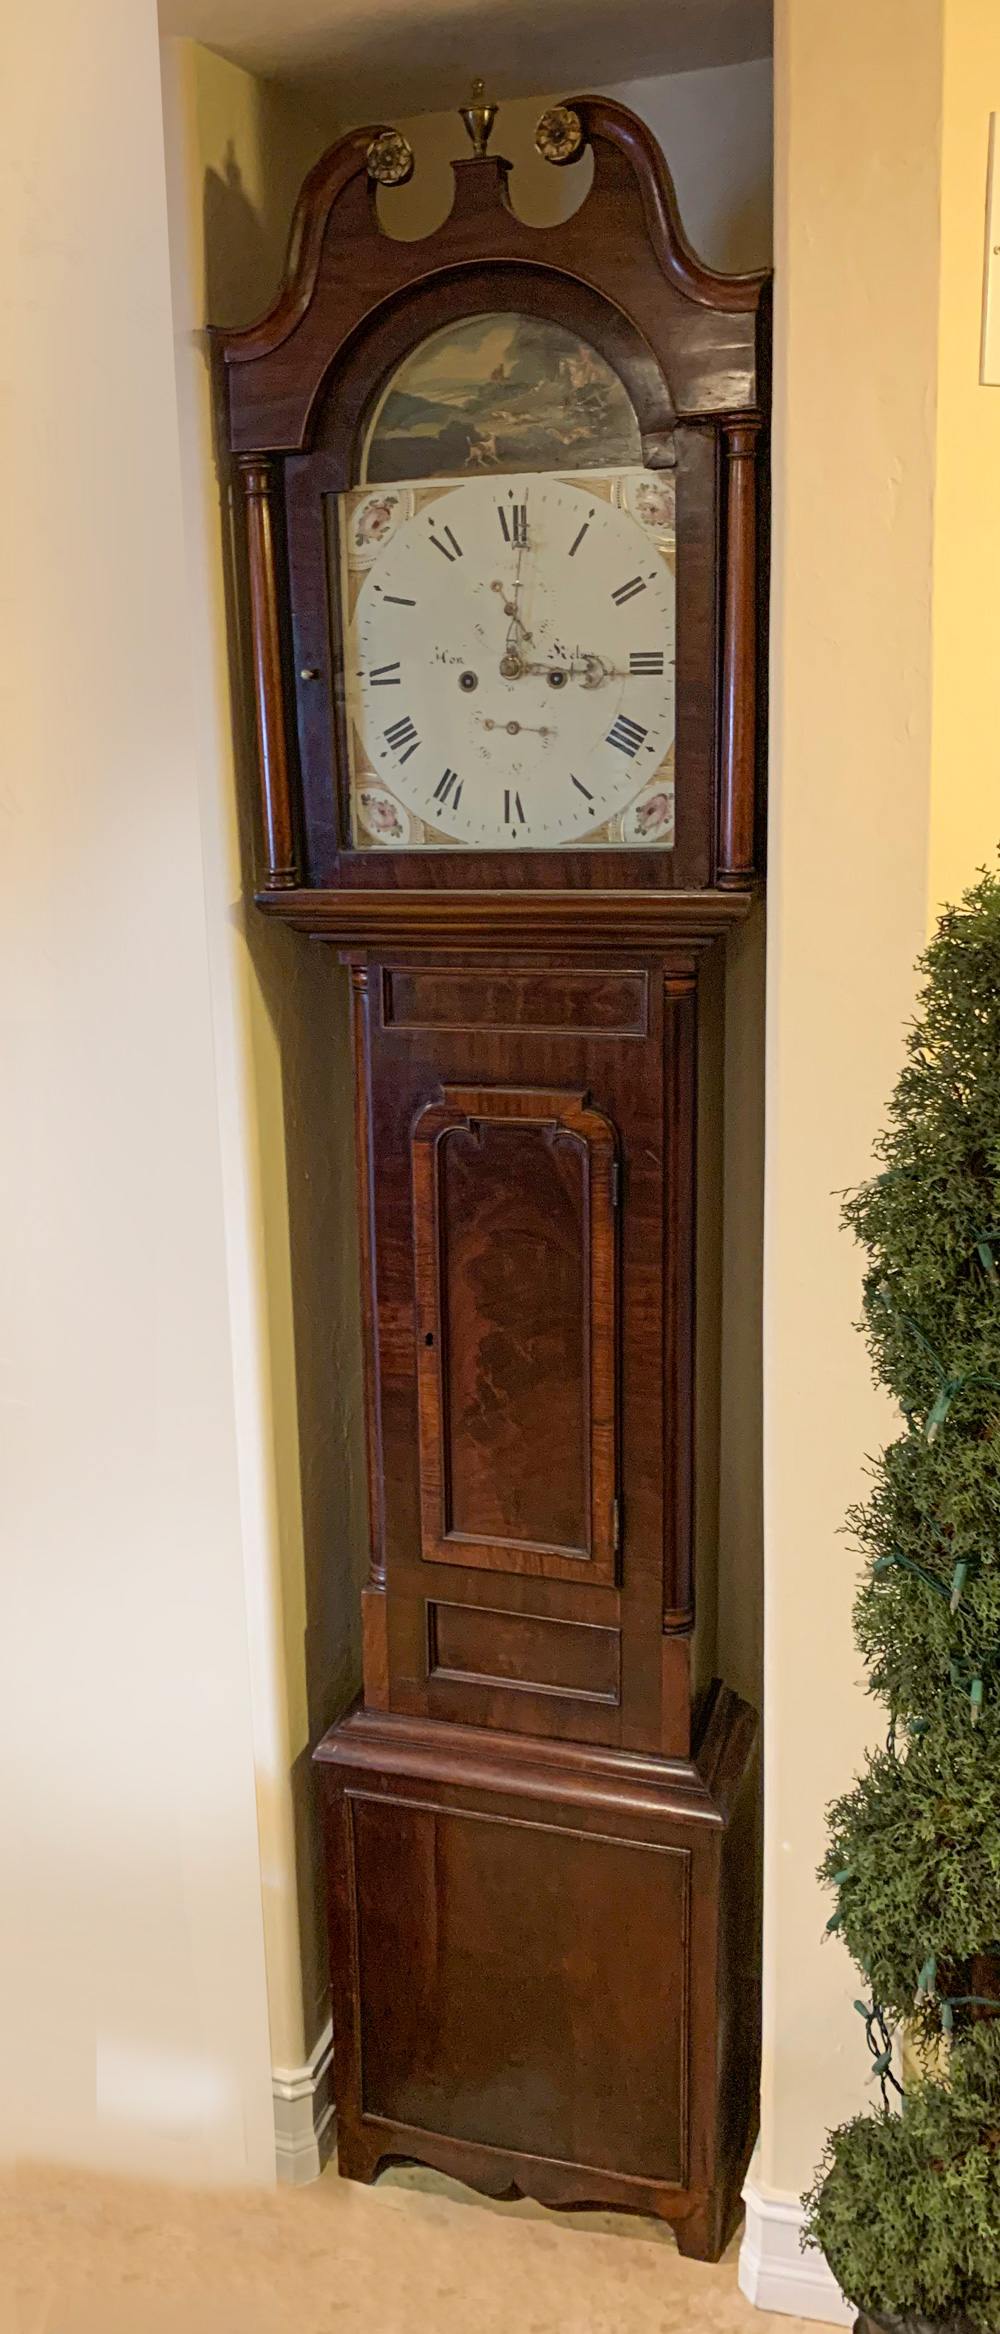 EARLY TALL CASE CLOCK: Tall case